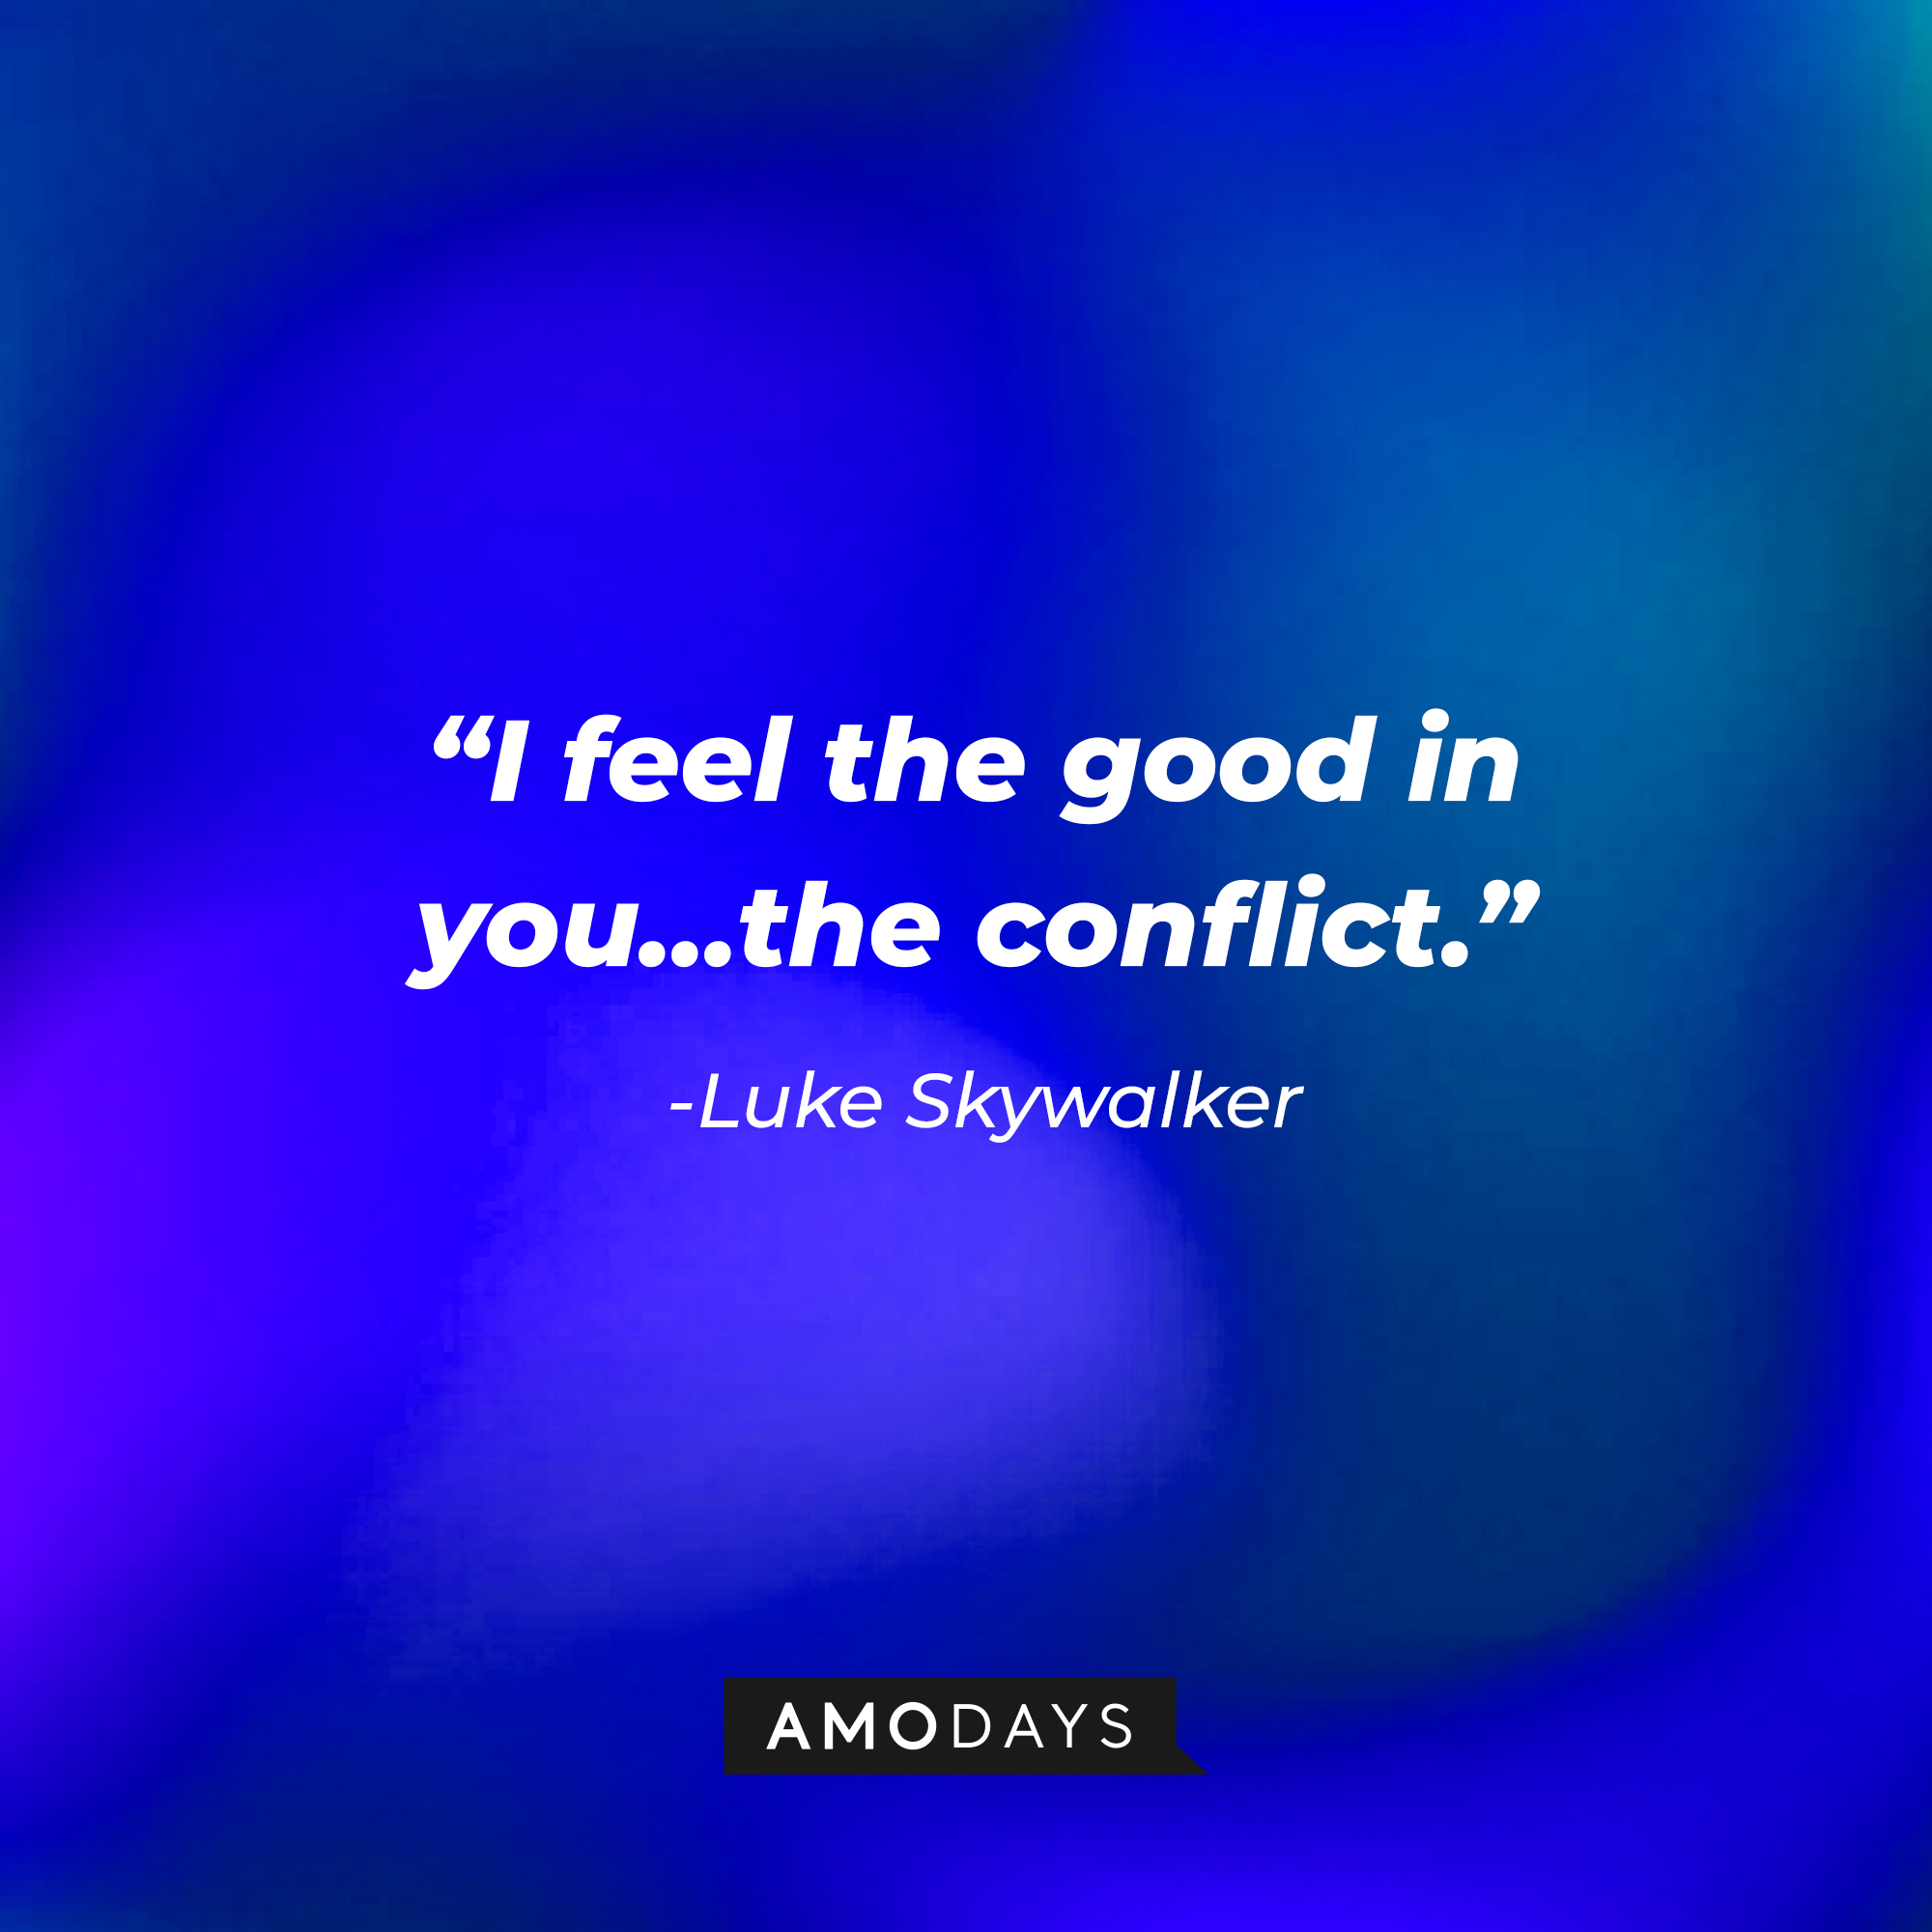 Luke Skywalker’s quote: "I feel the good in you...the conflict."  | Source: AmoDays